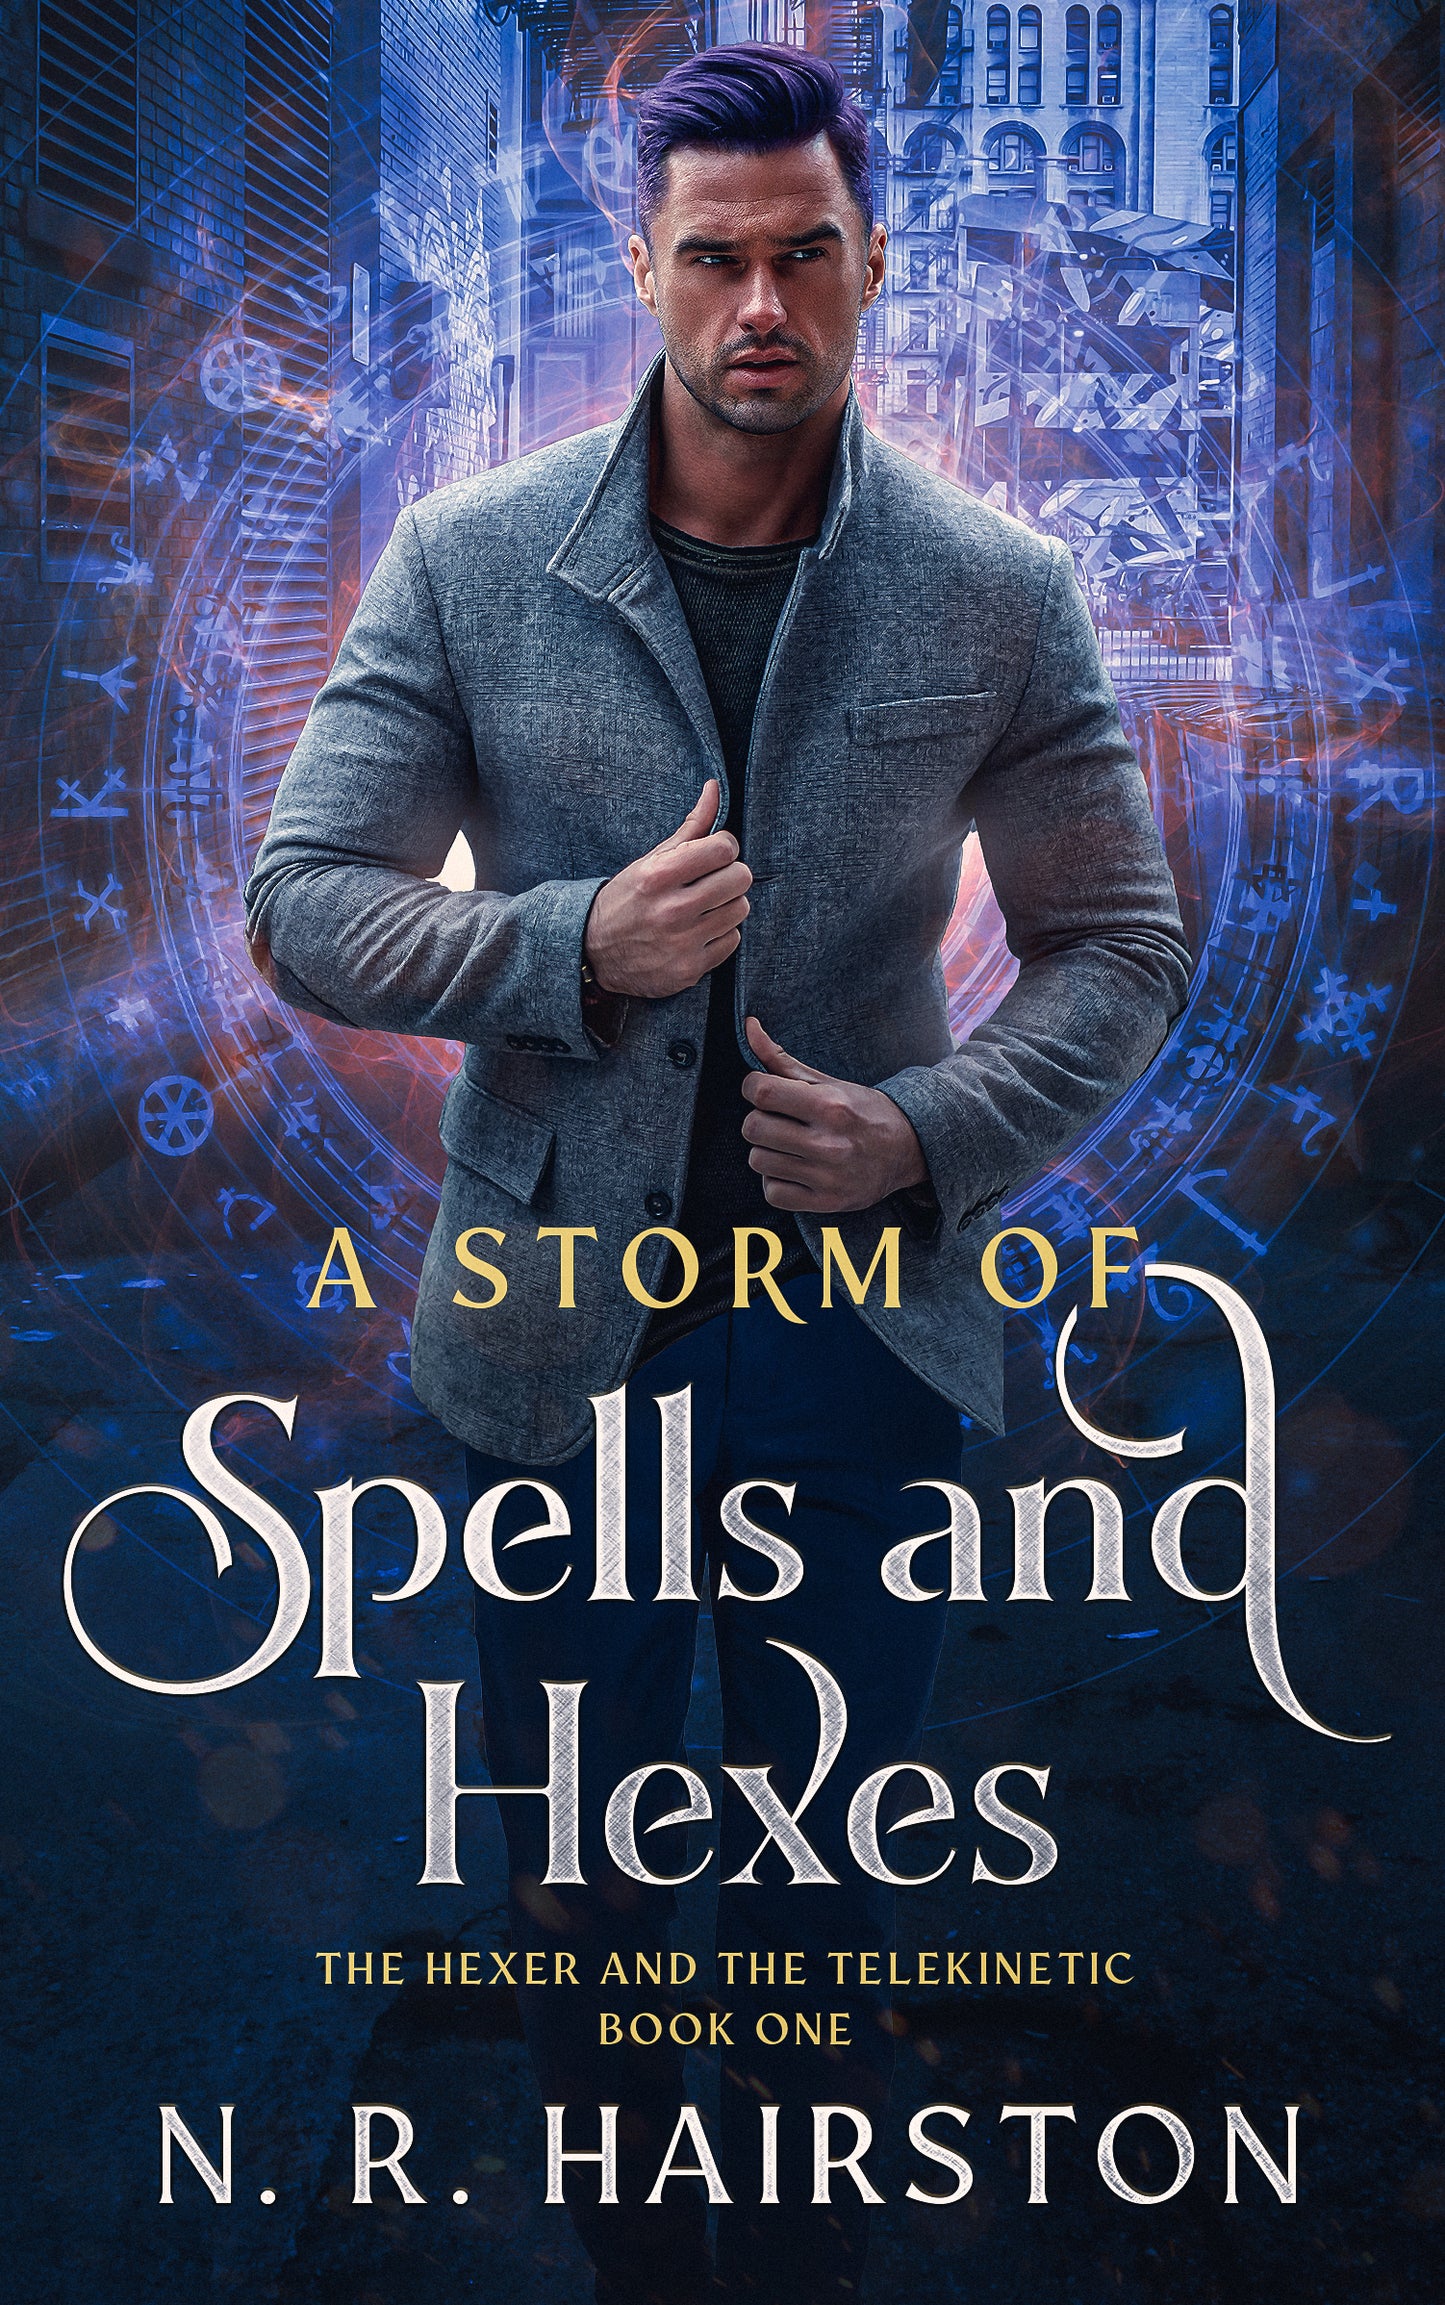 A Storm of Spells and Hexes, The Hexer and the Telekinetic, Book One Paperback